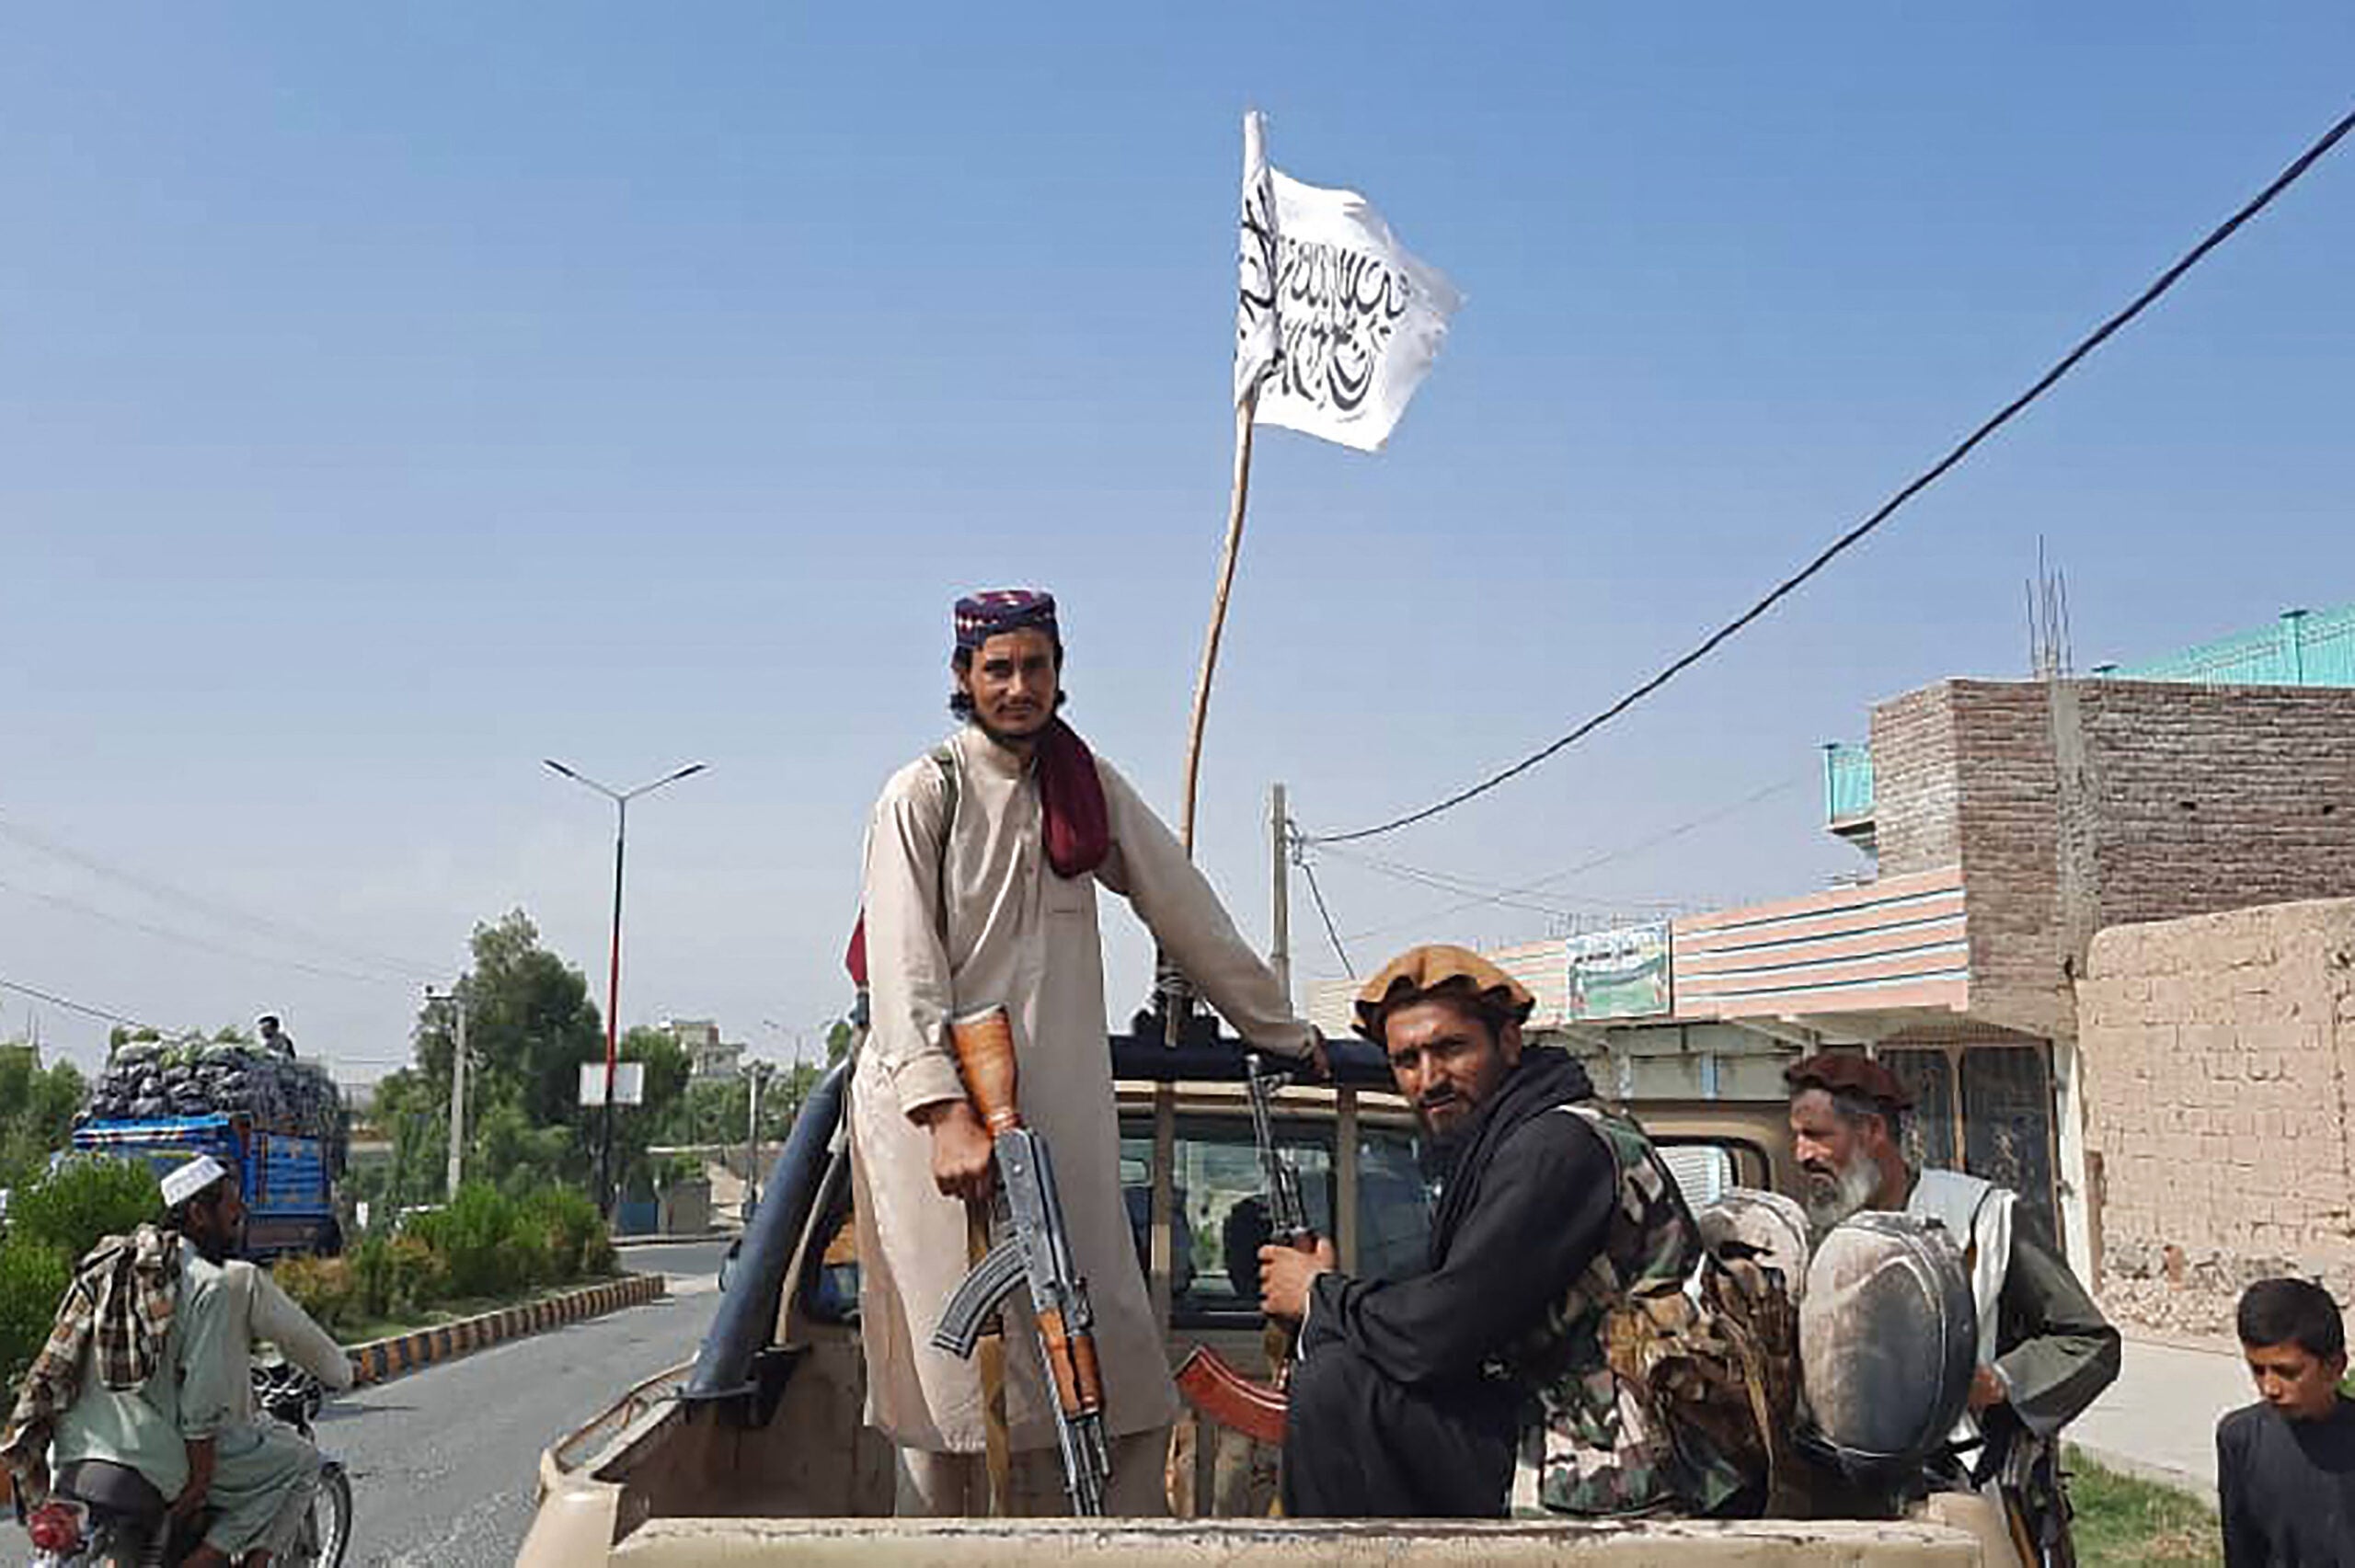 TOPSHOT - Taliban fighters drive an Afghan National Army (ANA) vehicle through the streets of Laghman province on August 15, 2021. (Photo by - / AFP) (Photo by -/AFP via Getty Images)